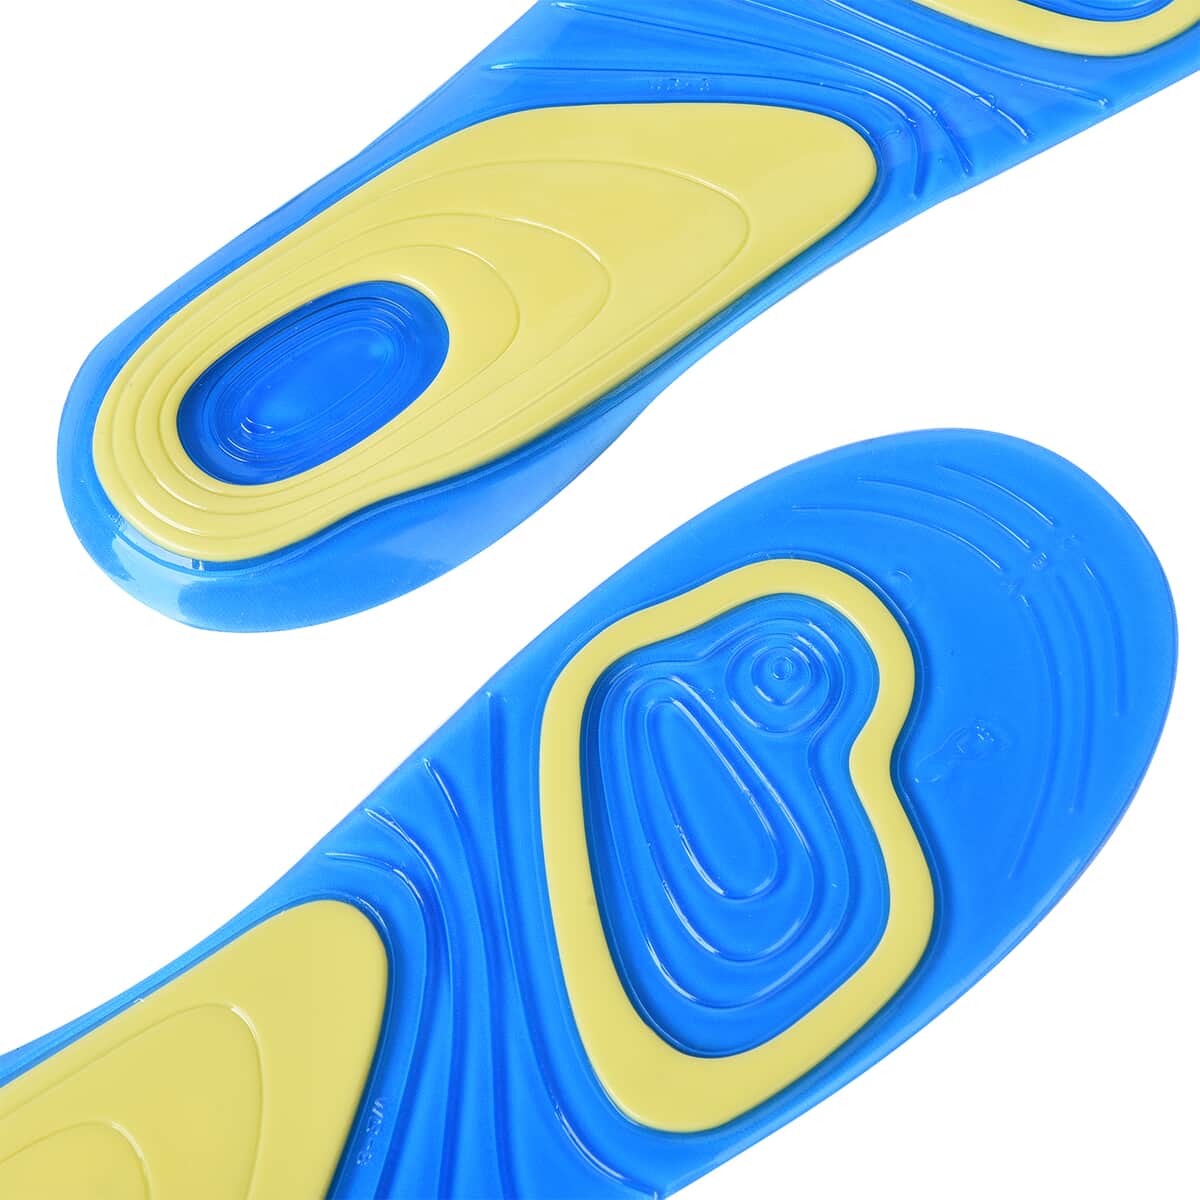 Anti Fatigue Athletic Running Work Shoe Gel Insoles for Women's - Blue & Yellow, Fits Womens Shoe Sizes 6 to 11 image number 2